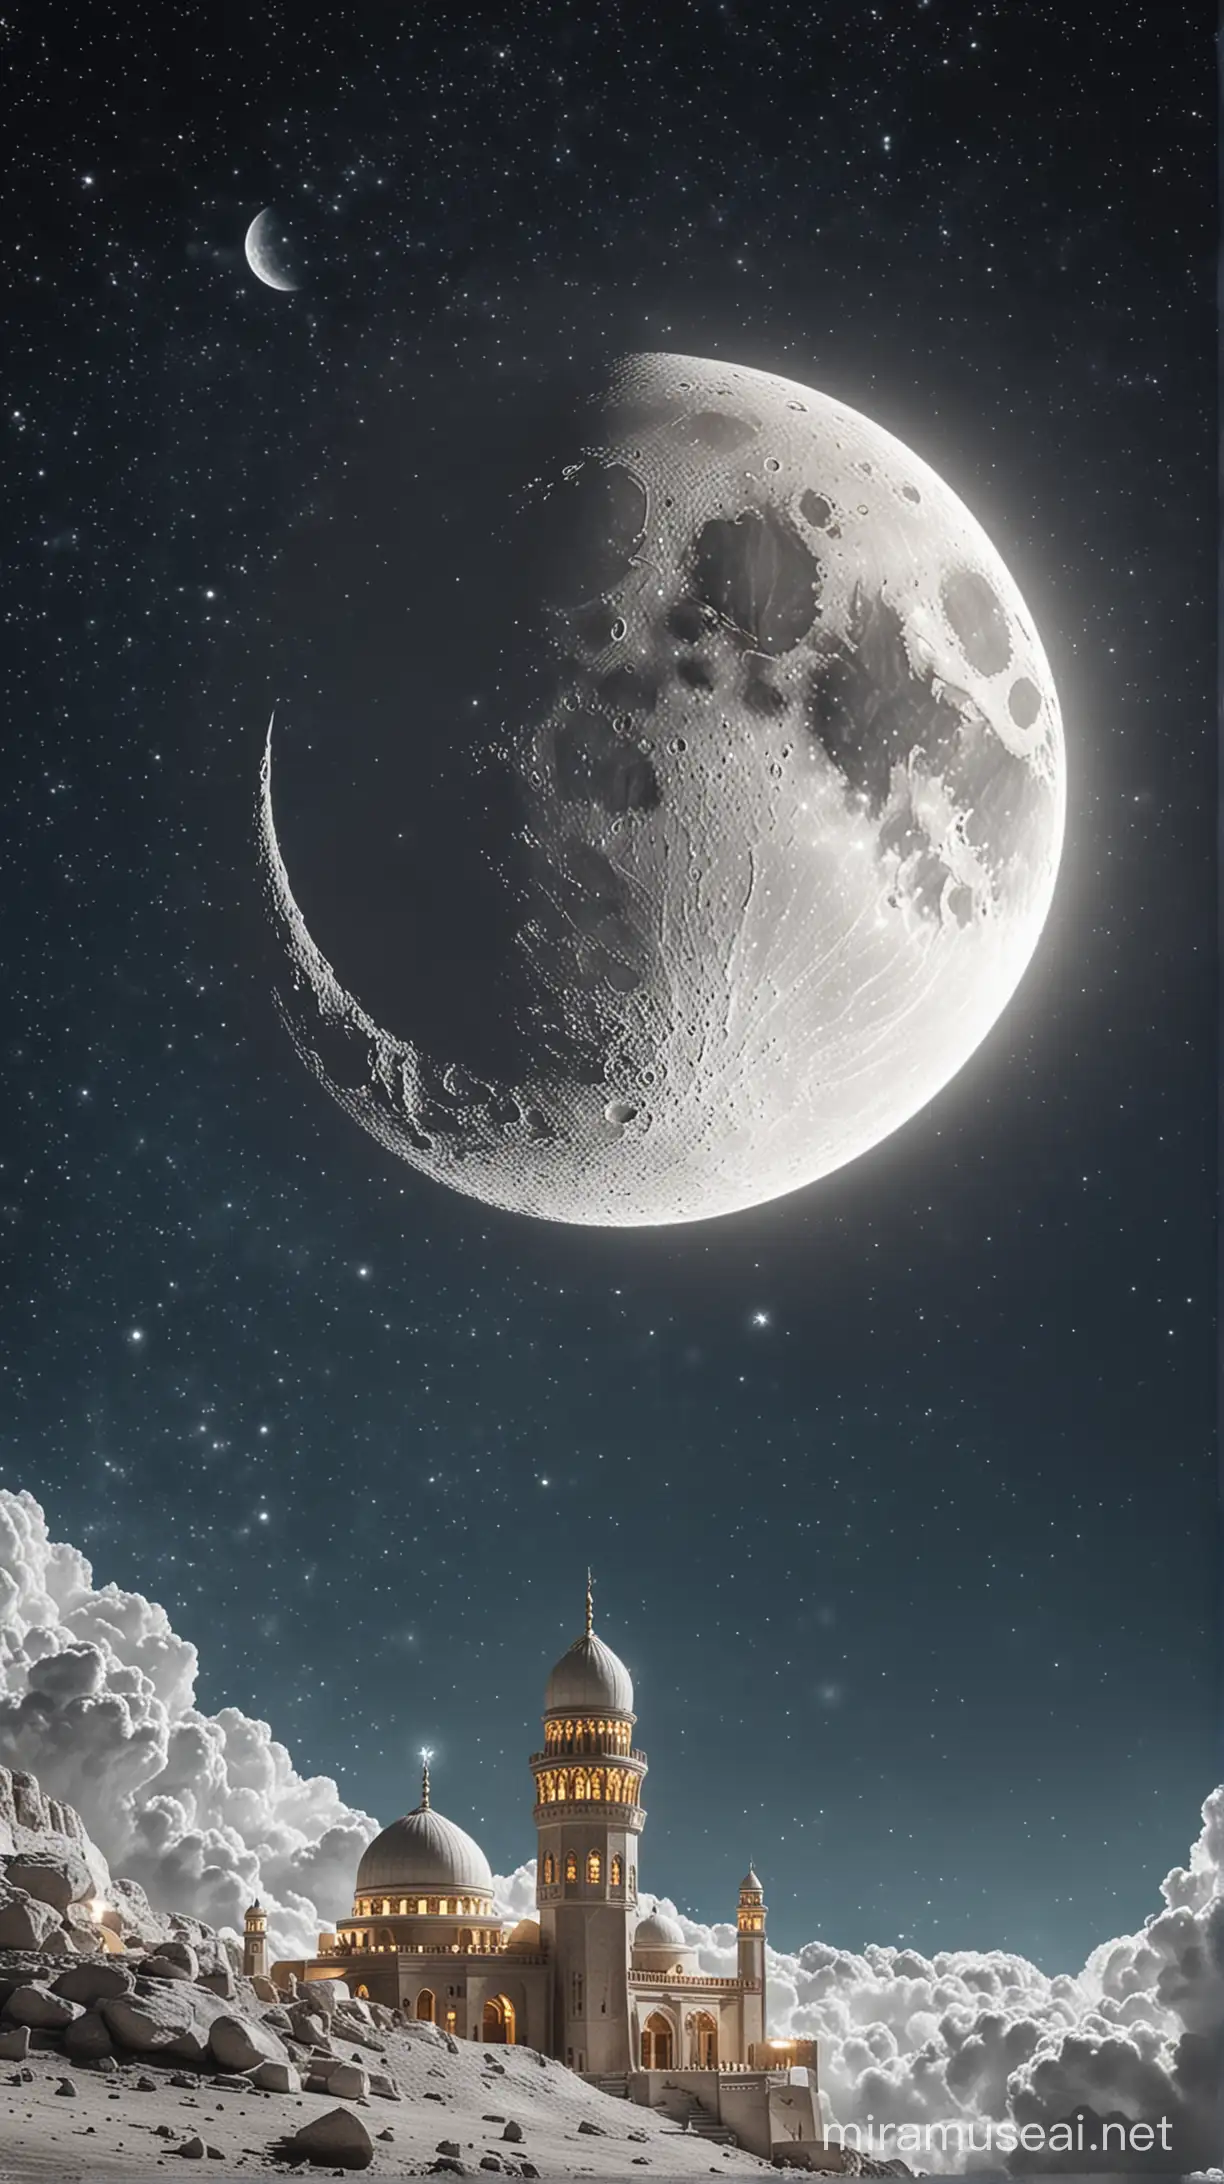 generate an image  for the wished poster of the customized gift shop, a gift customized on the moon it Ramadan Mubarak, the image contains the moon and the moon carries the product of the shop